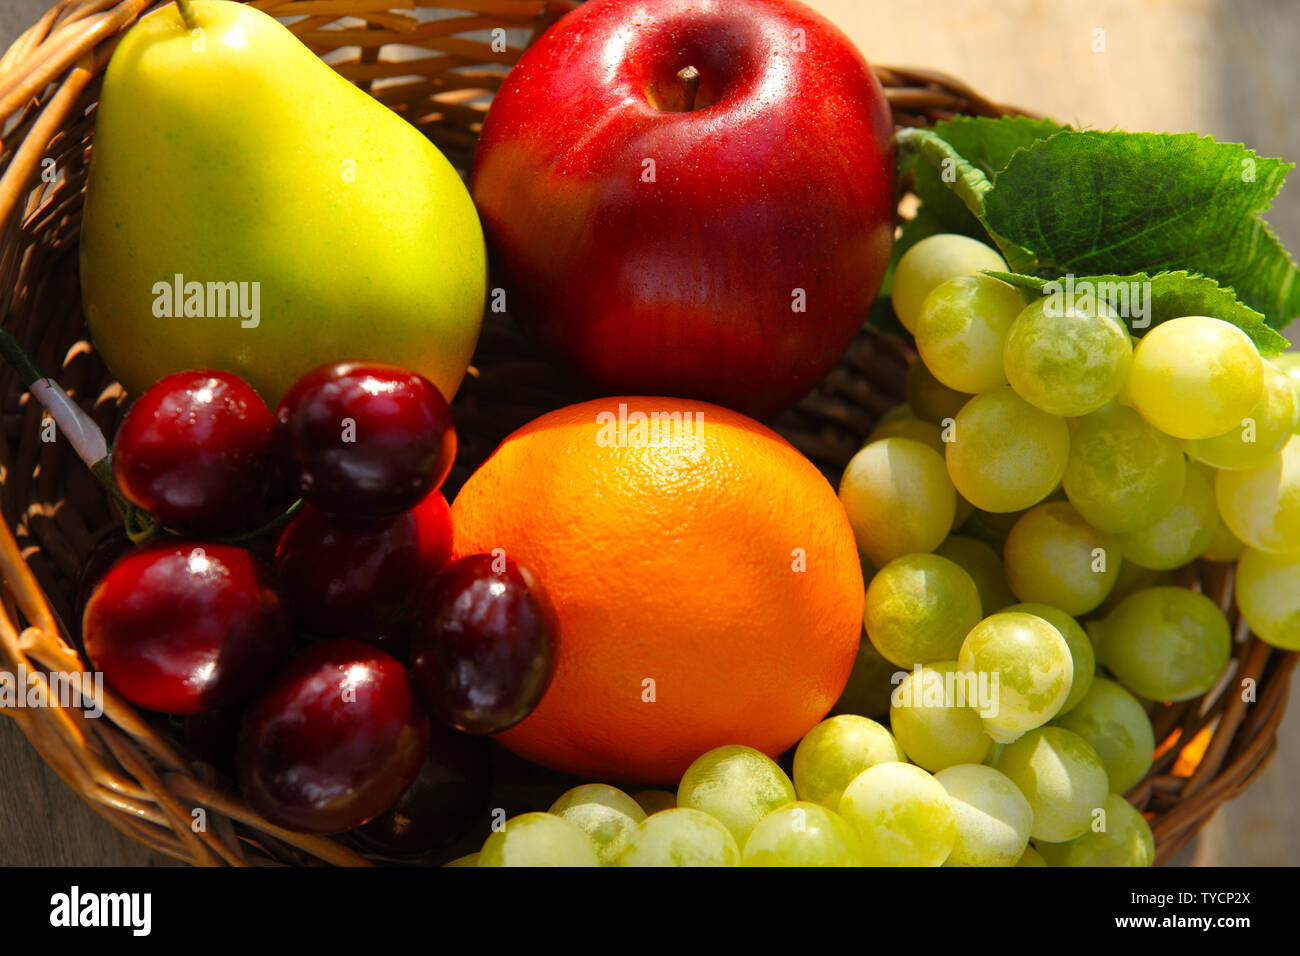 Close up of a basket of fruits Stock Photo